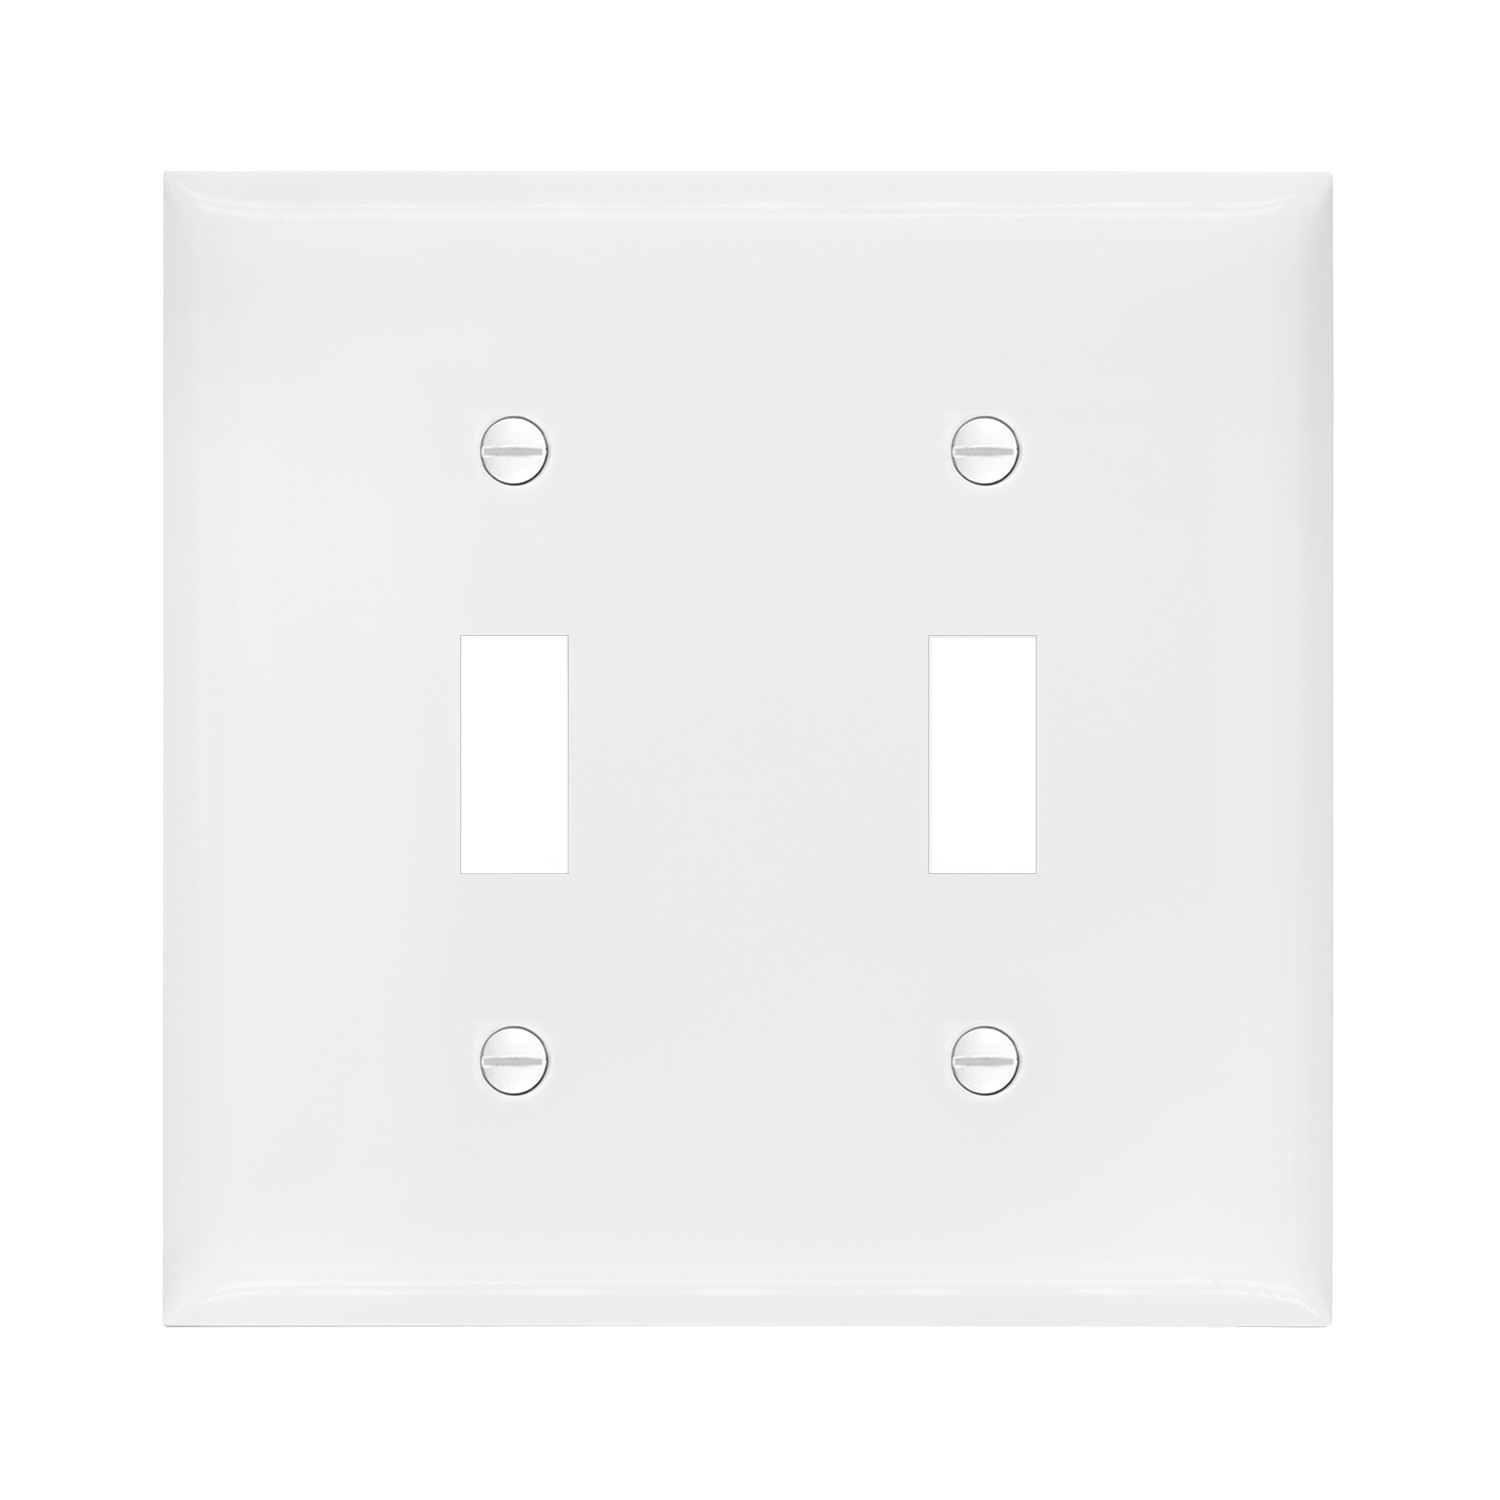 High-quality Home Simplicity Security 2 Gang Toggle Switch Plastic Wall Plate, SSC-ST-2